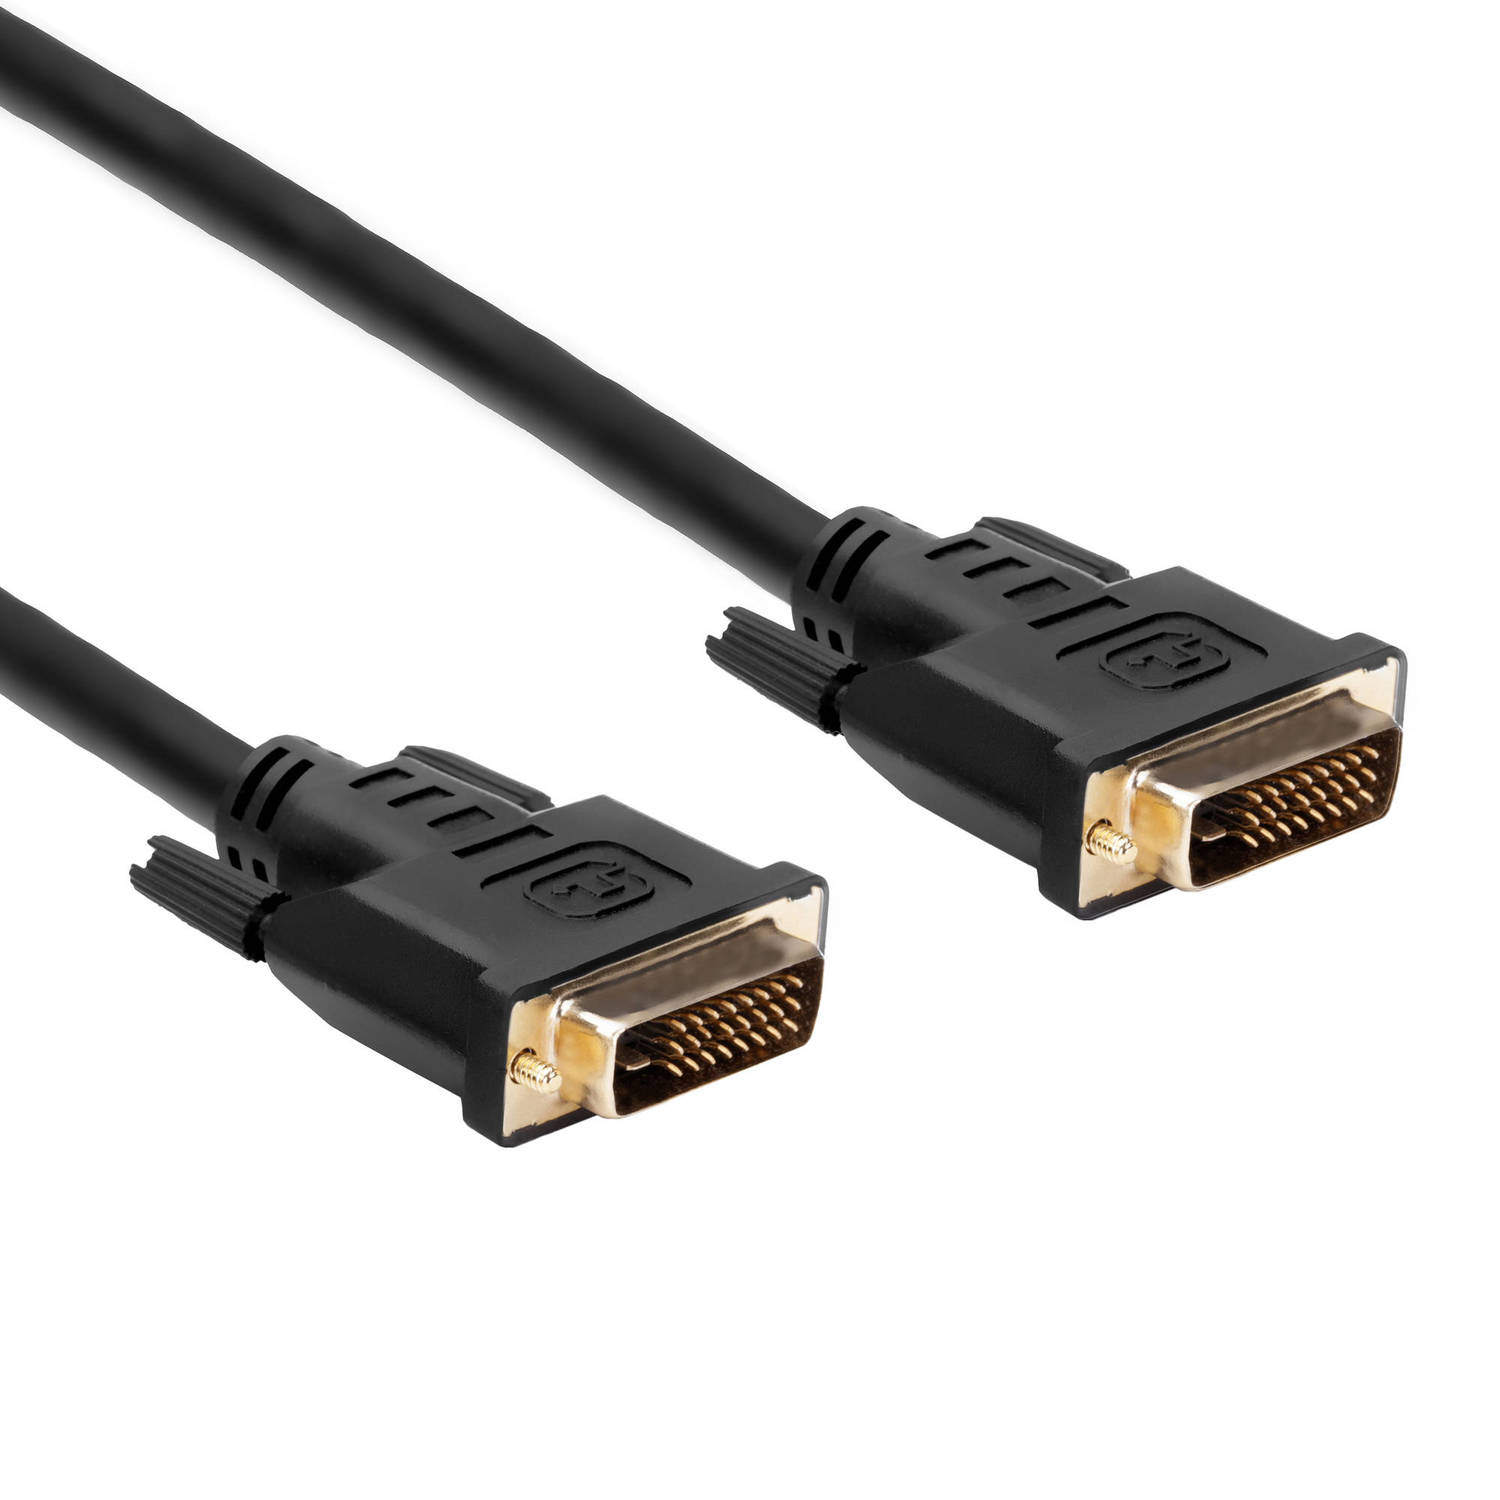 Cable Pearstone Dvi D Dual Link 10